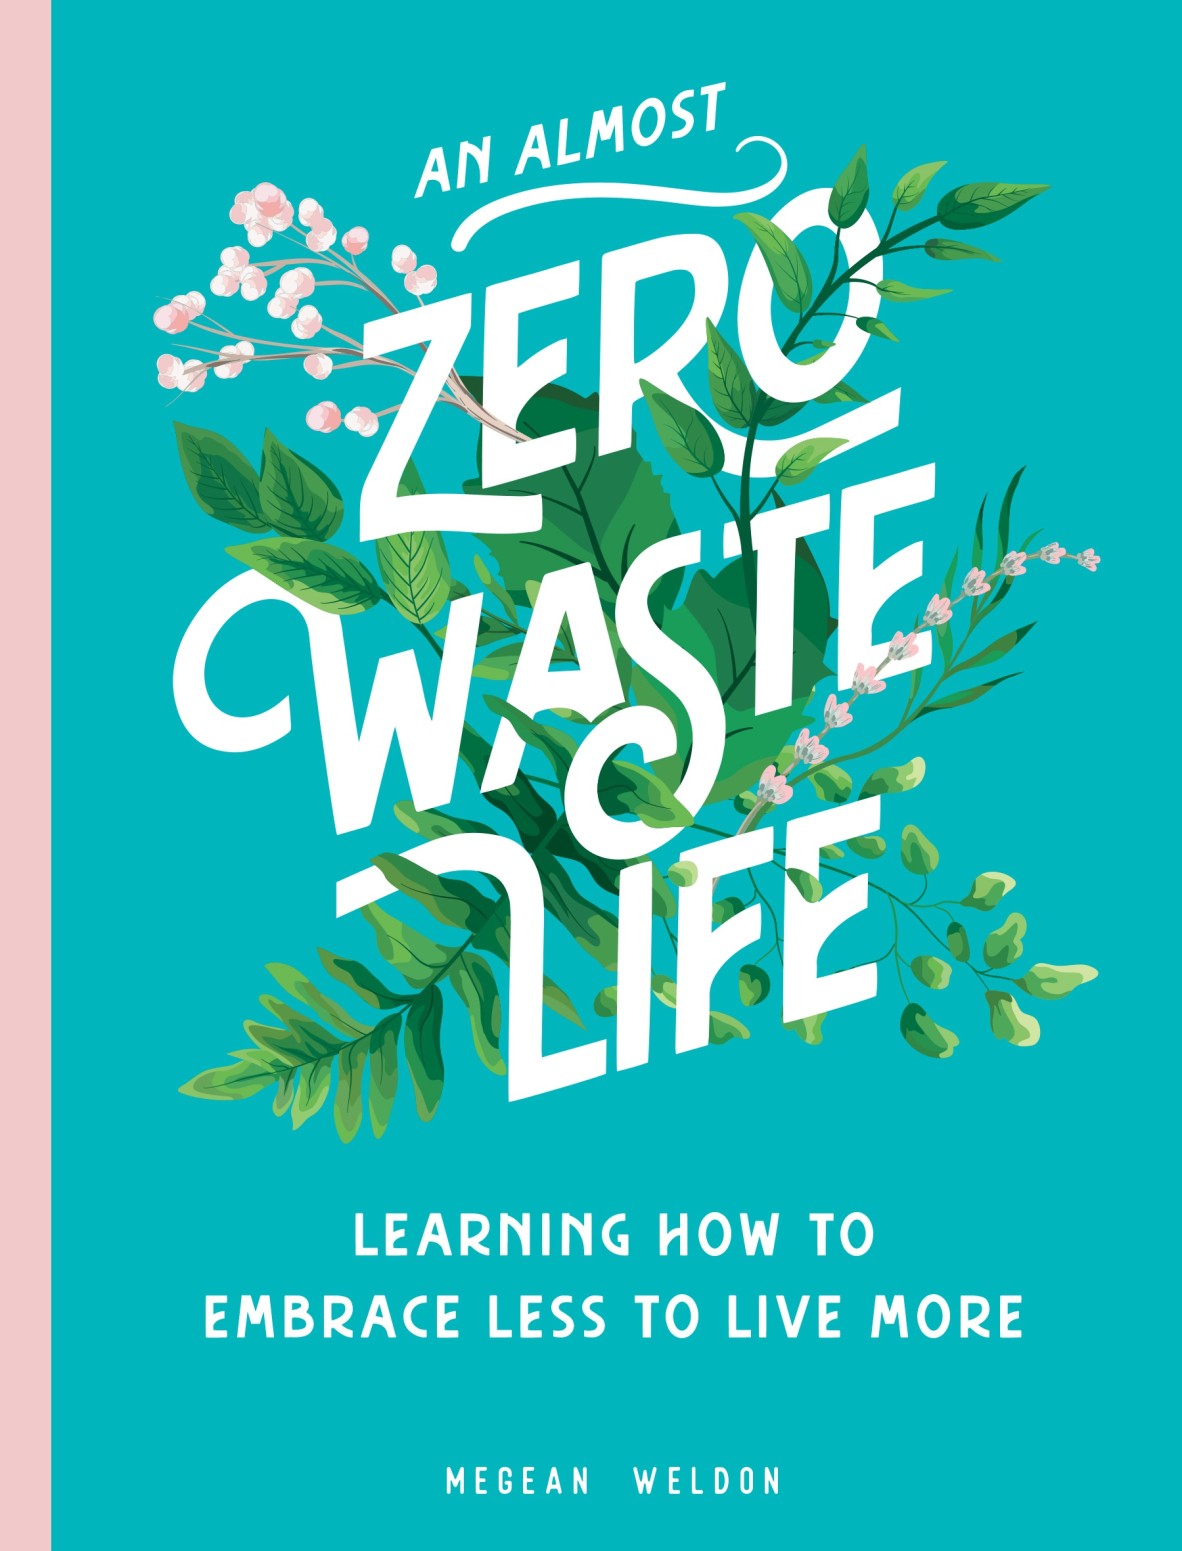 Book cover of an Almost Zero Waste Life